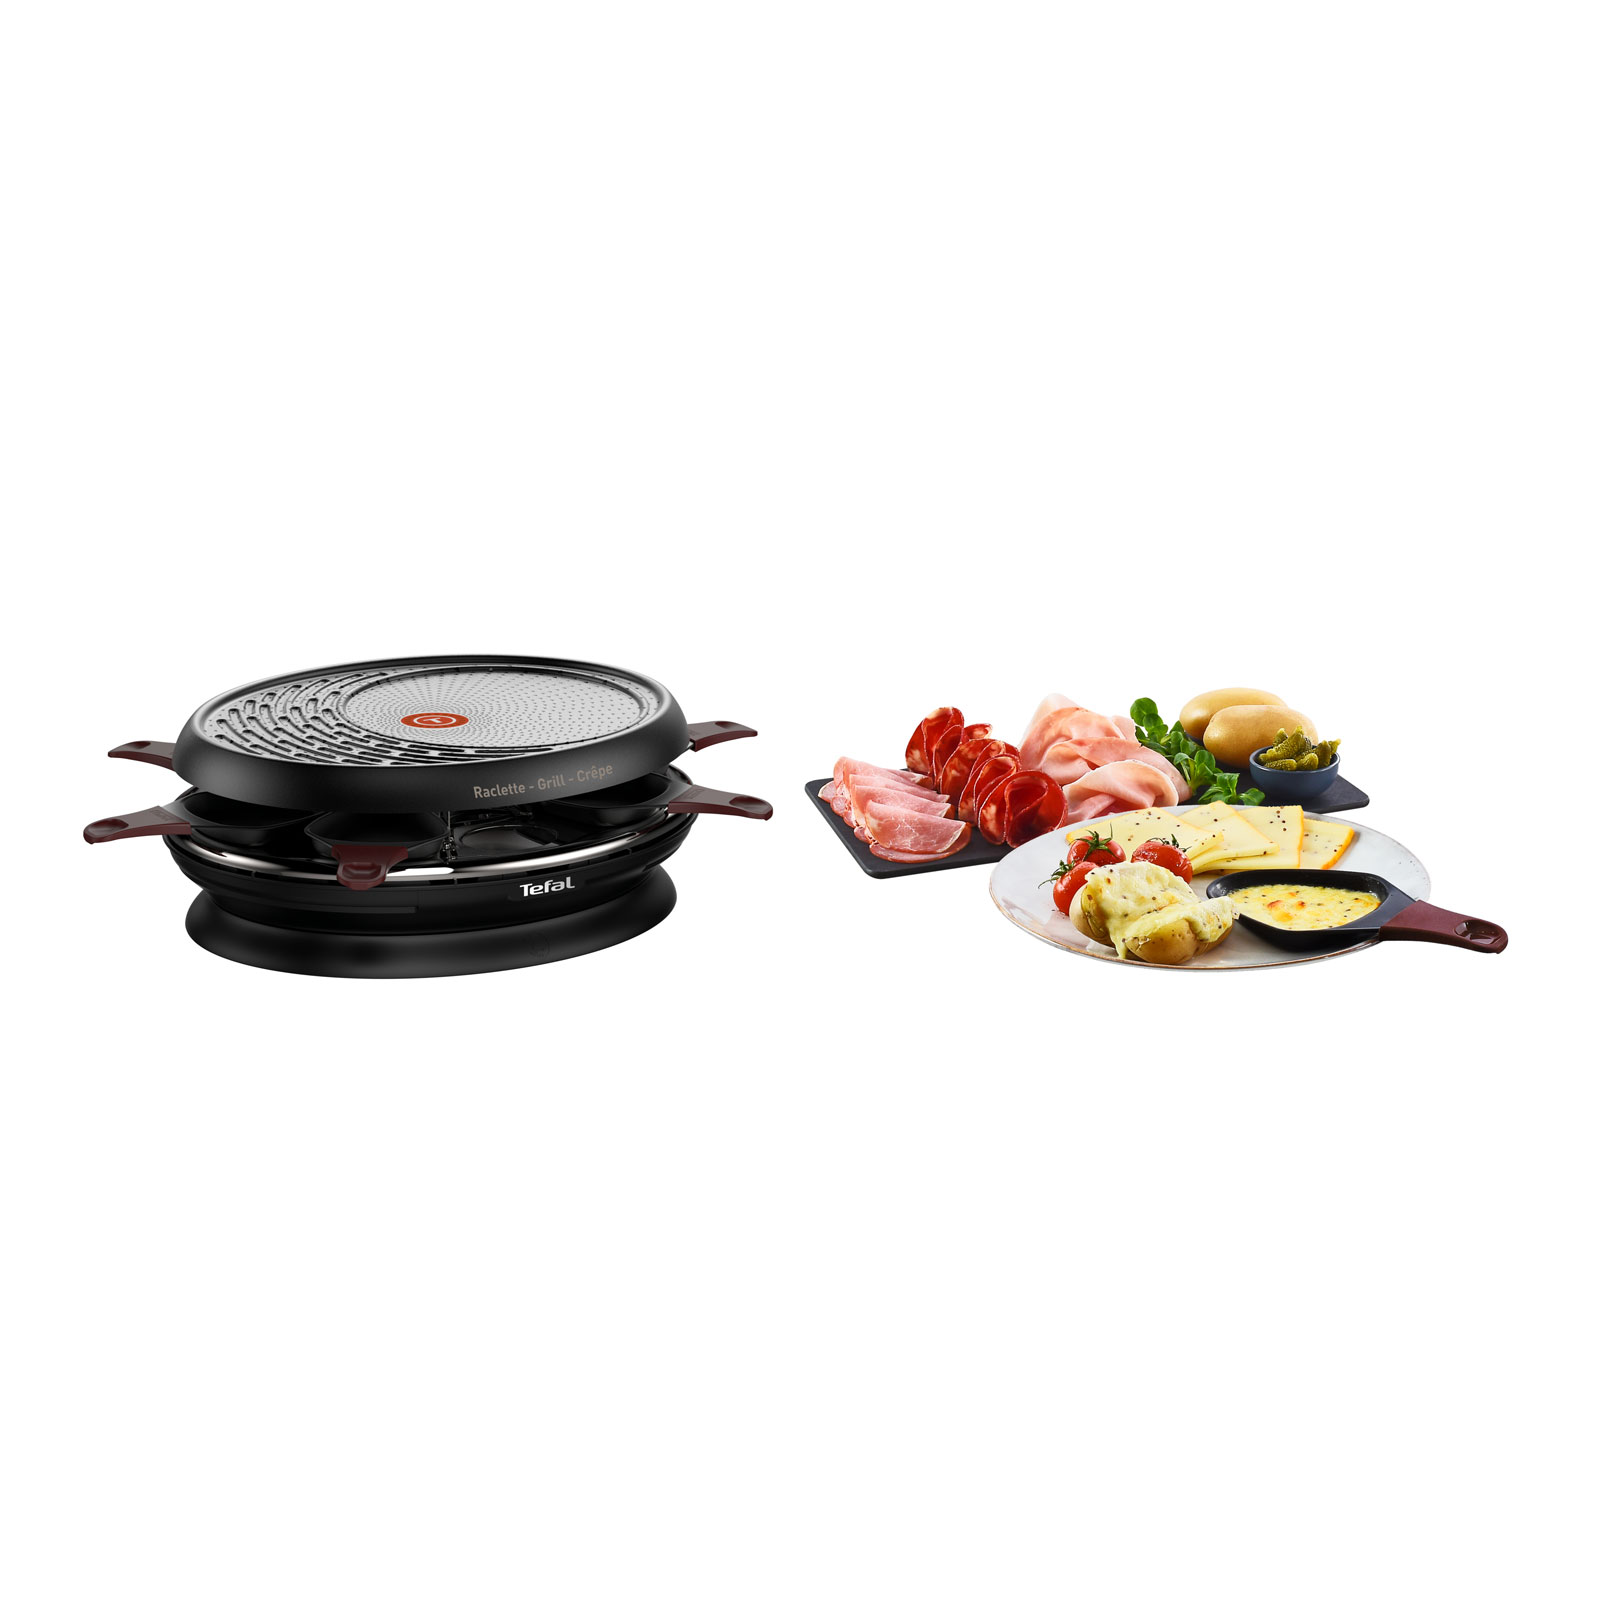 TEFAL RE3200 STORE'IN 3 Raclettegrill